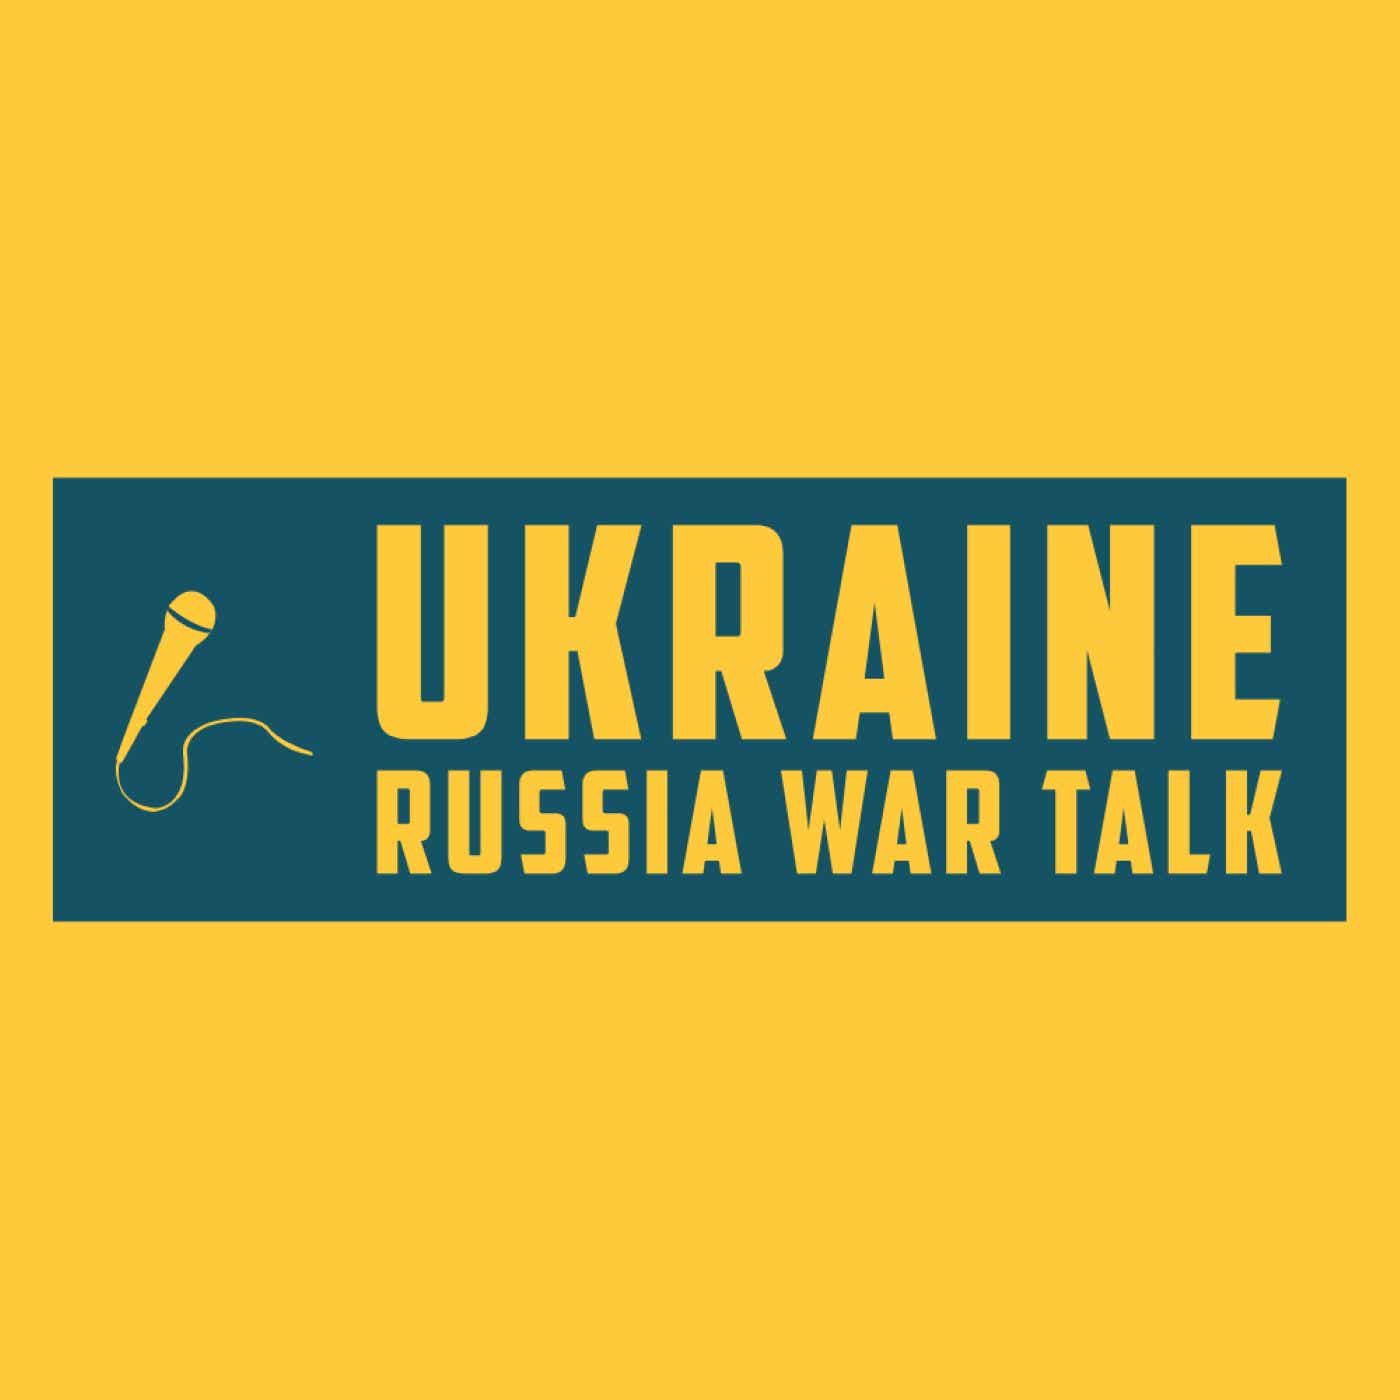 Ukraine Russia War Talk (private feed for barramiguel@yahoo.co.uk)